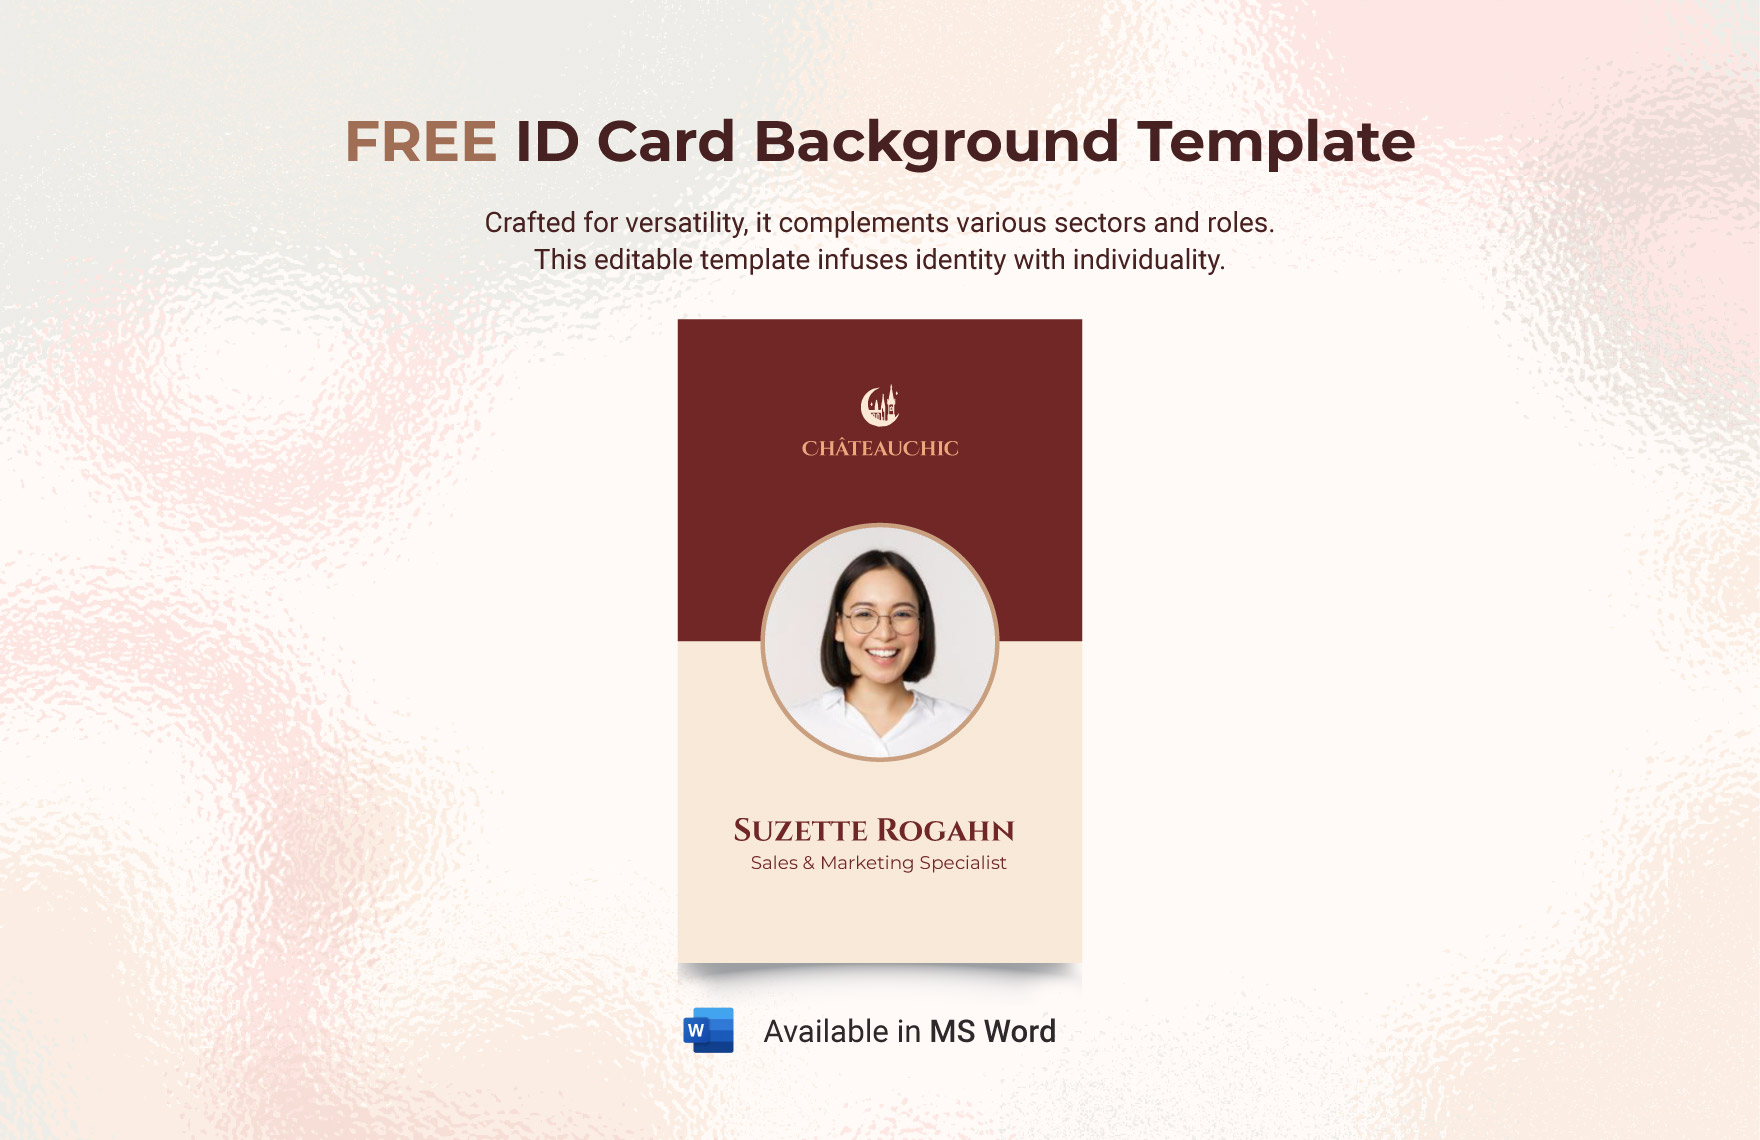 Free ID Card Background Template